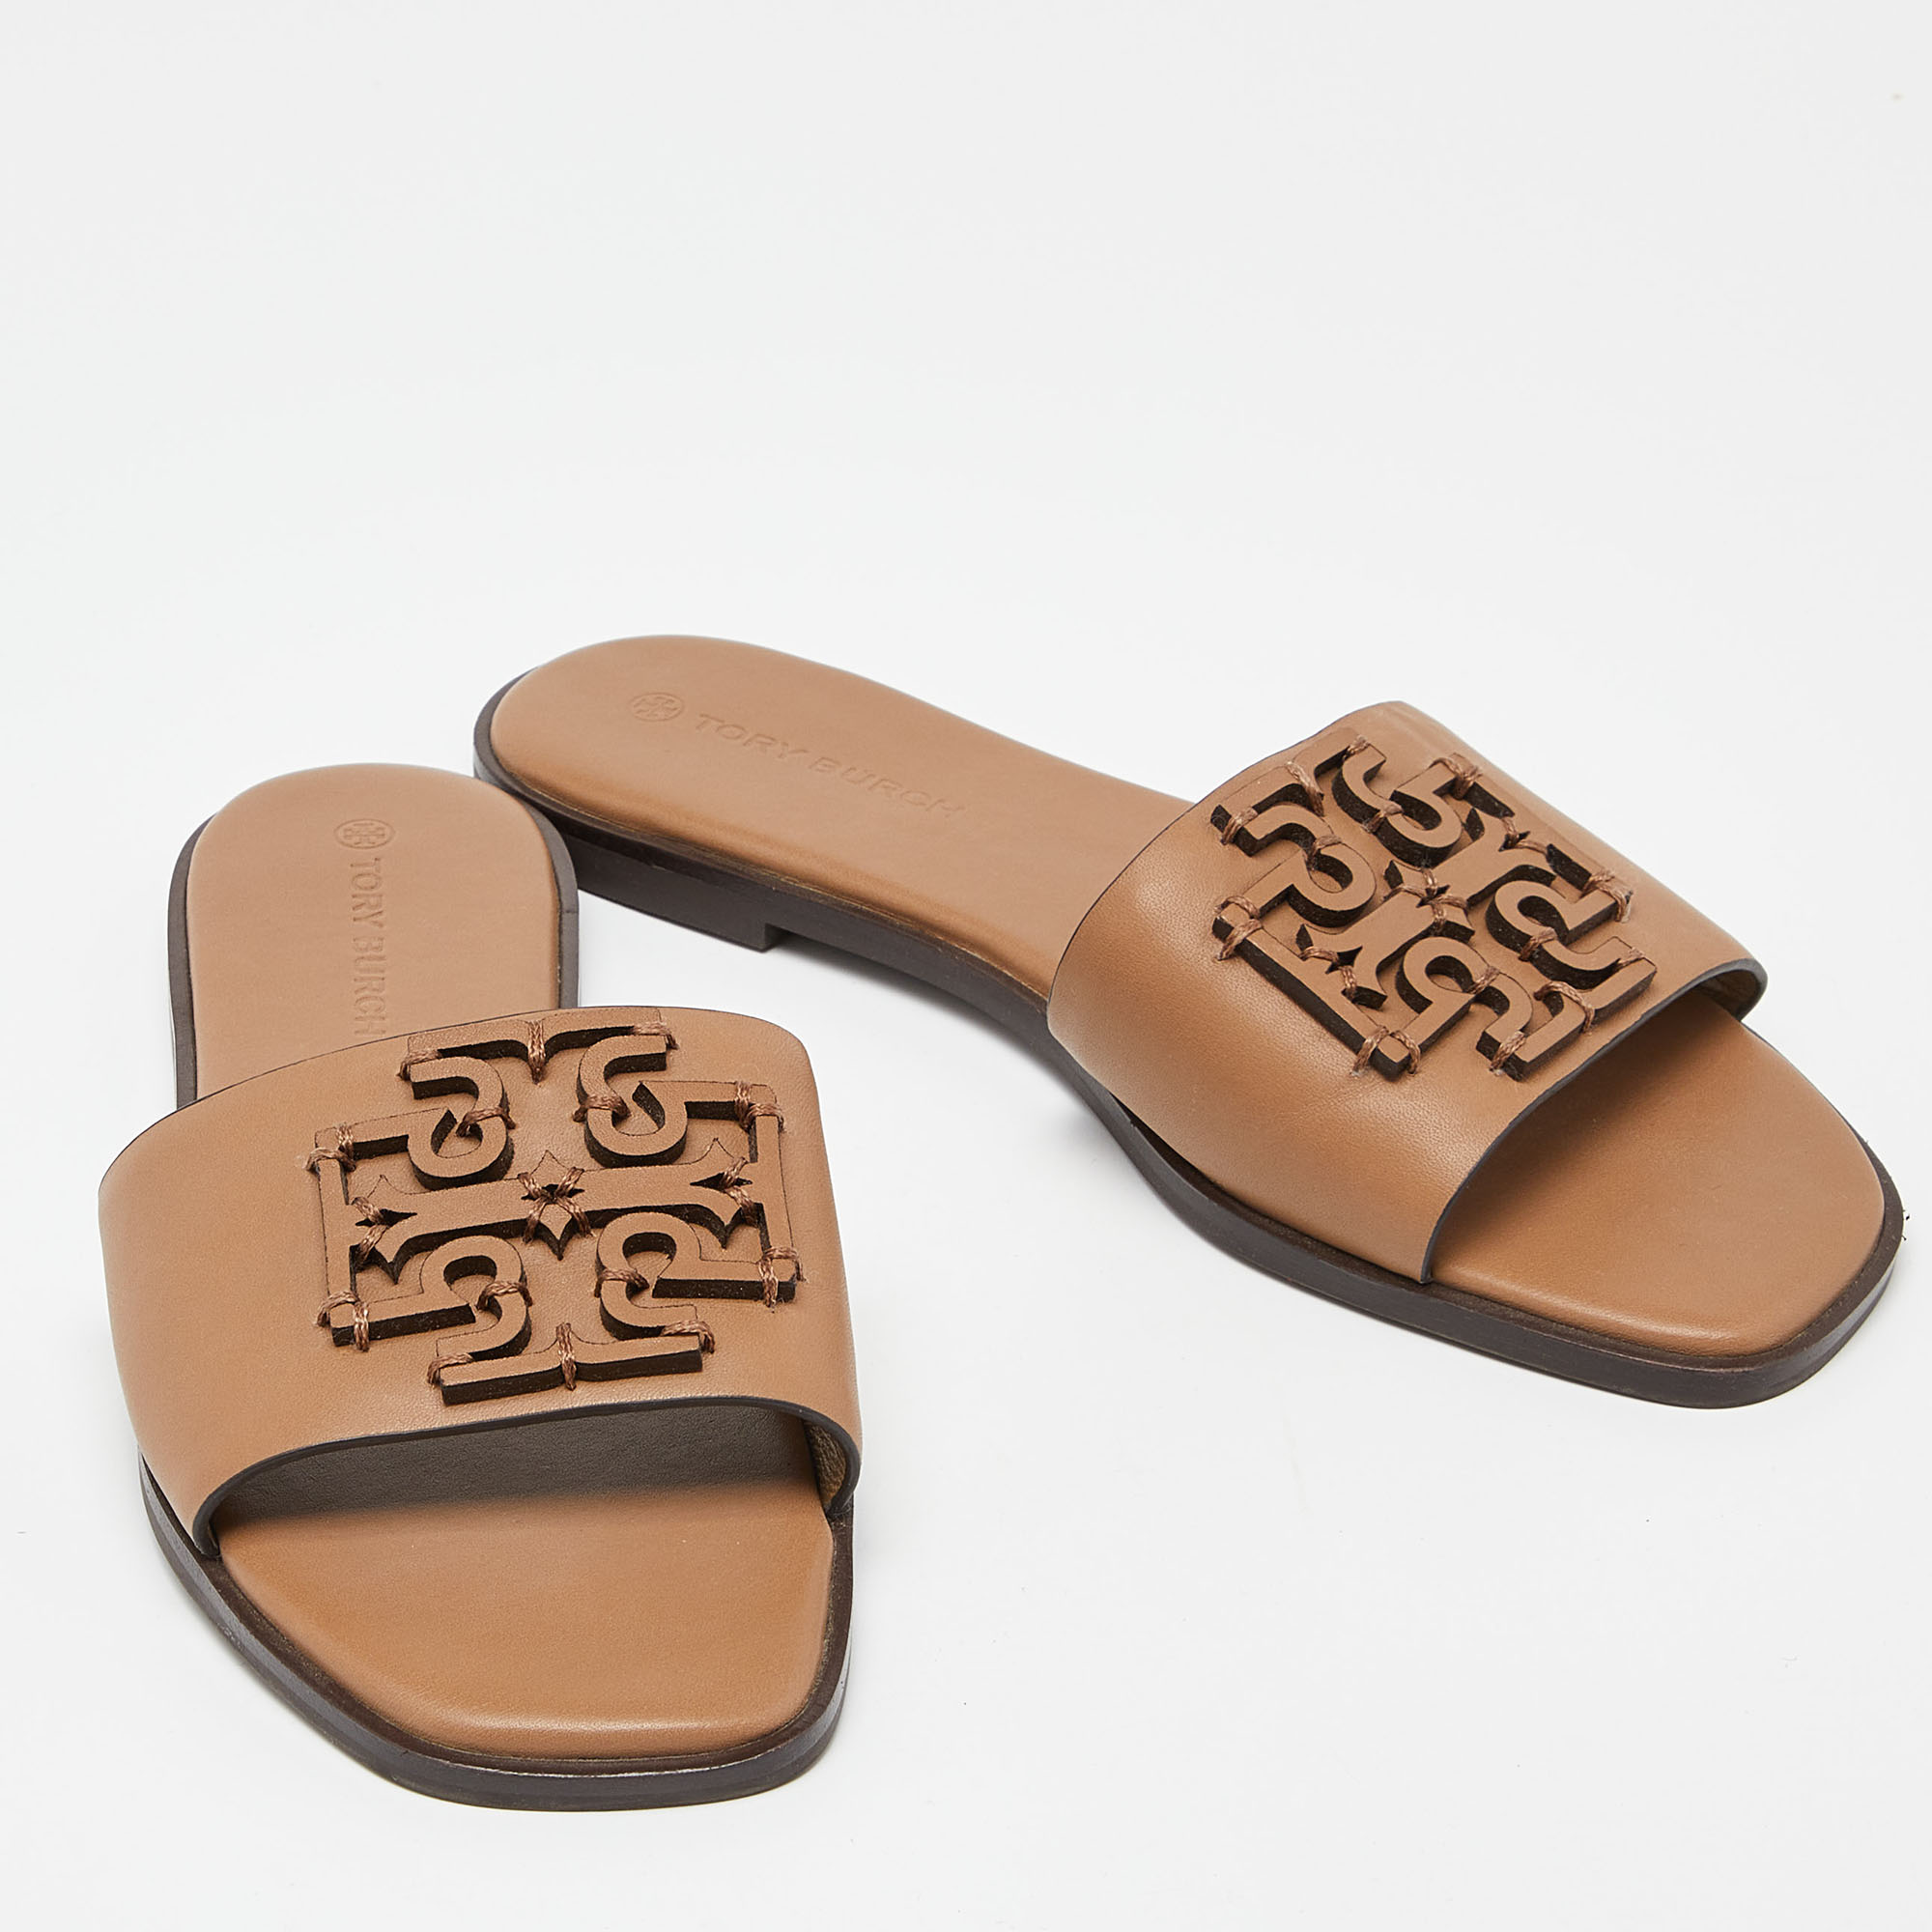 Tory Burch Beige Leather Ines Slide Sandals Size 38